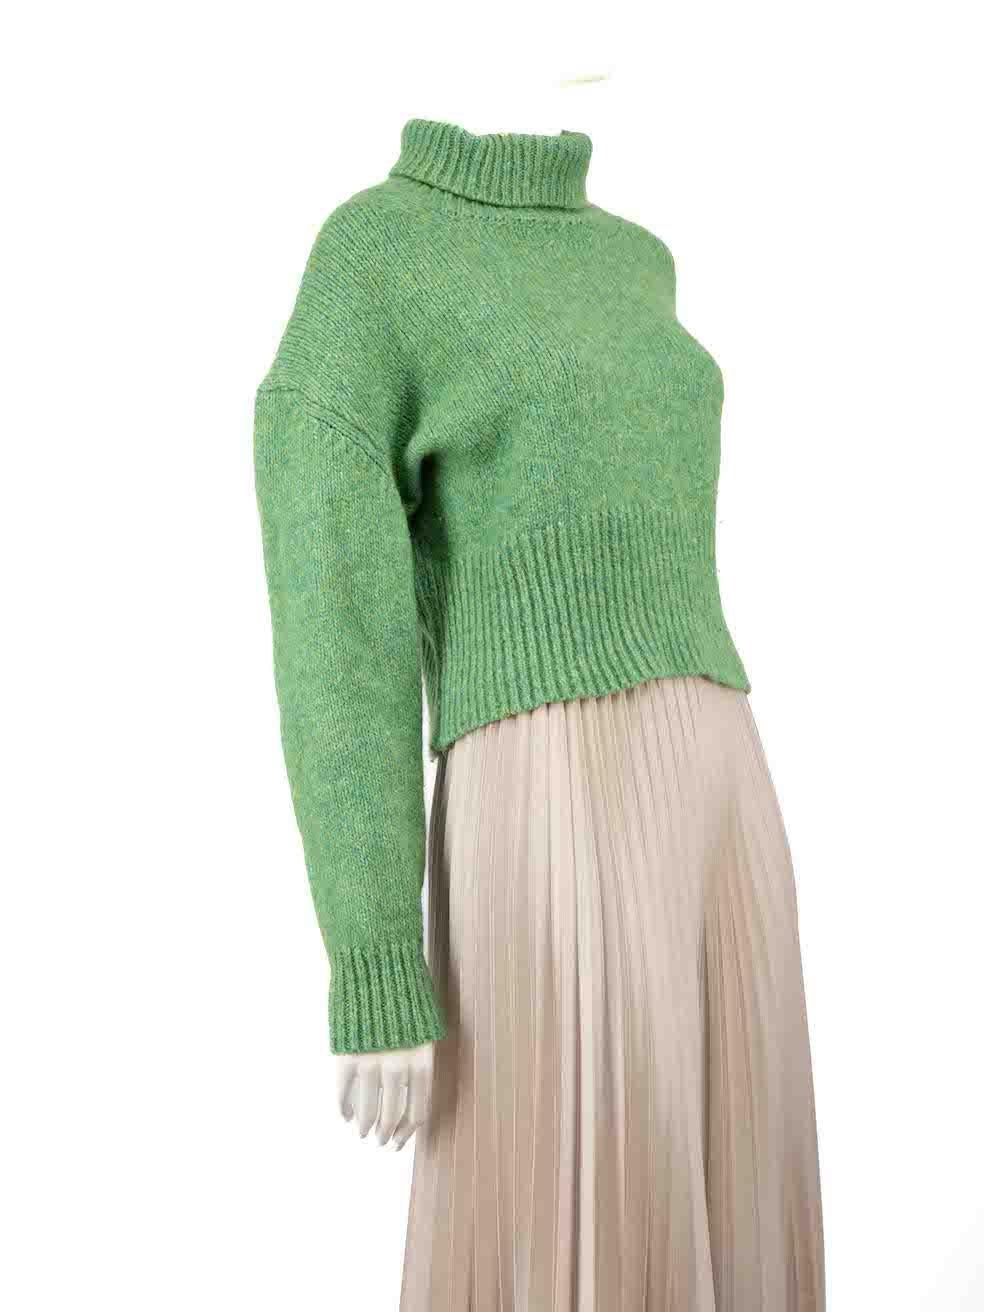 CONDITION is Very good. Minimal wear to jumper is evident. Minimal pilling to overall material on this used Paloma Wool designer resale item.
 
 
 
 Details
 
 
 Green
 
 Cotton
 
 Knit jumper
 
 Turtleneck
 
 Long sleeves
 
 Cropped fit
 
 
 
 
 
